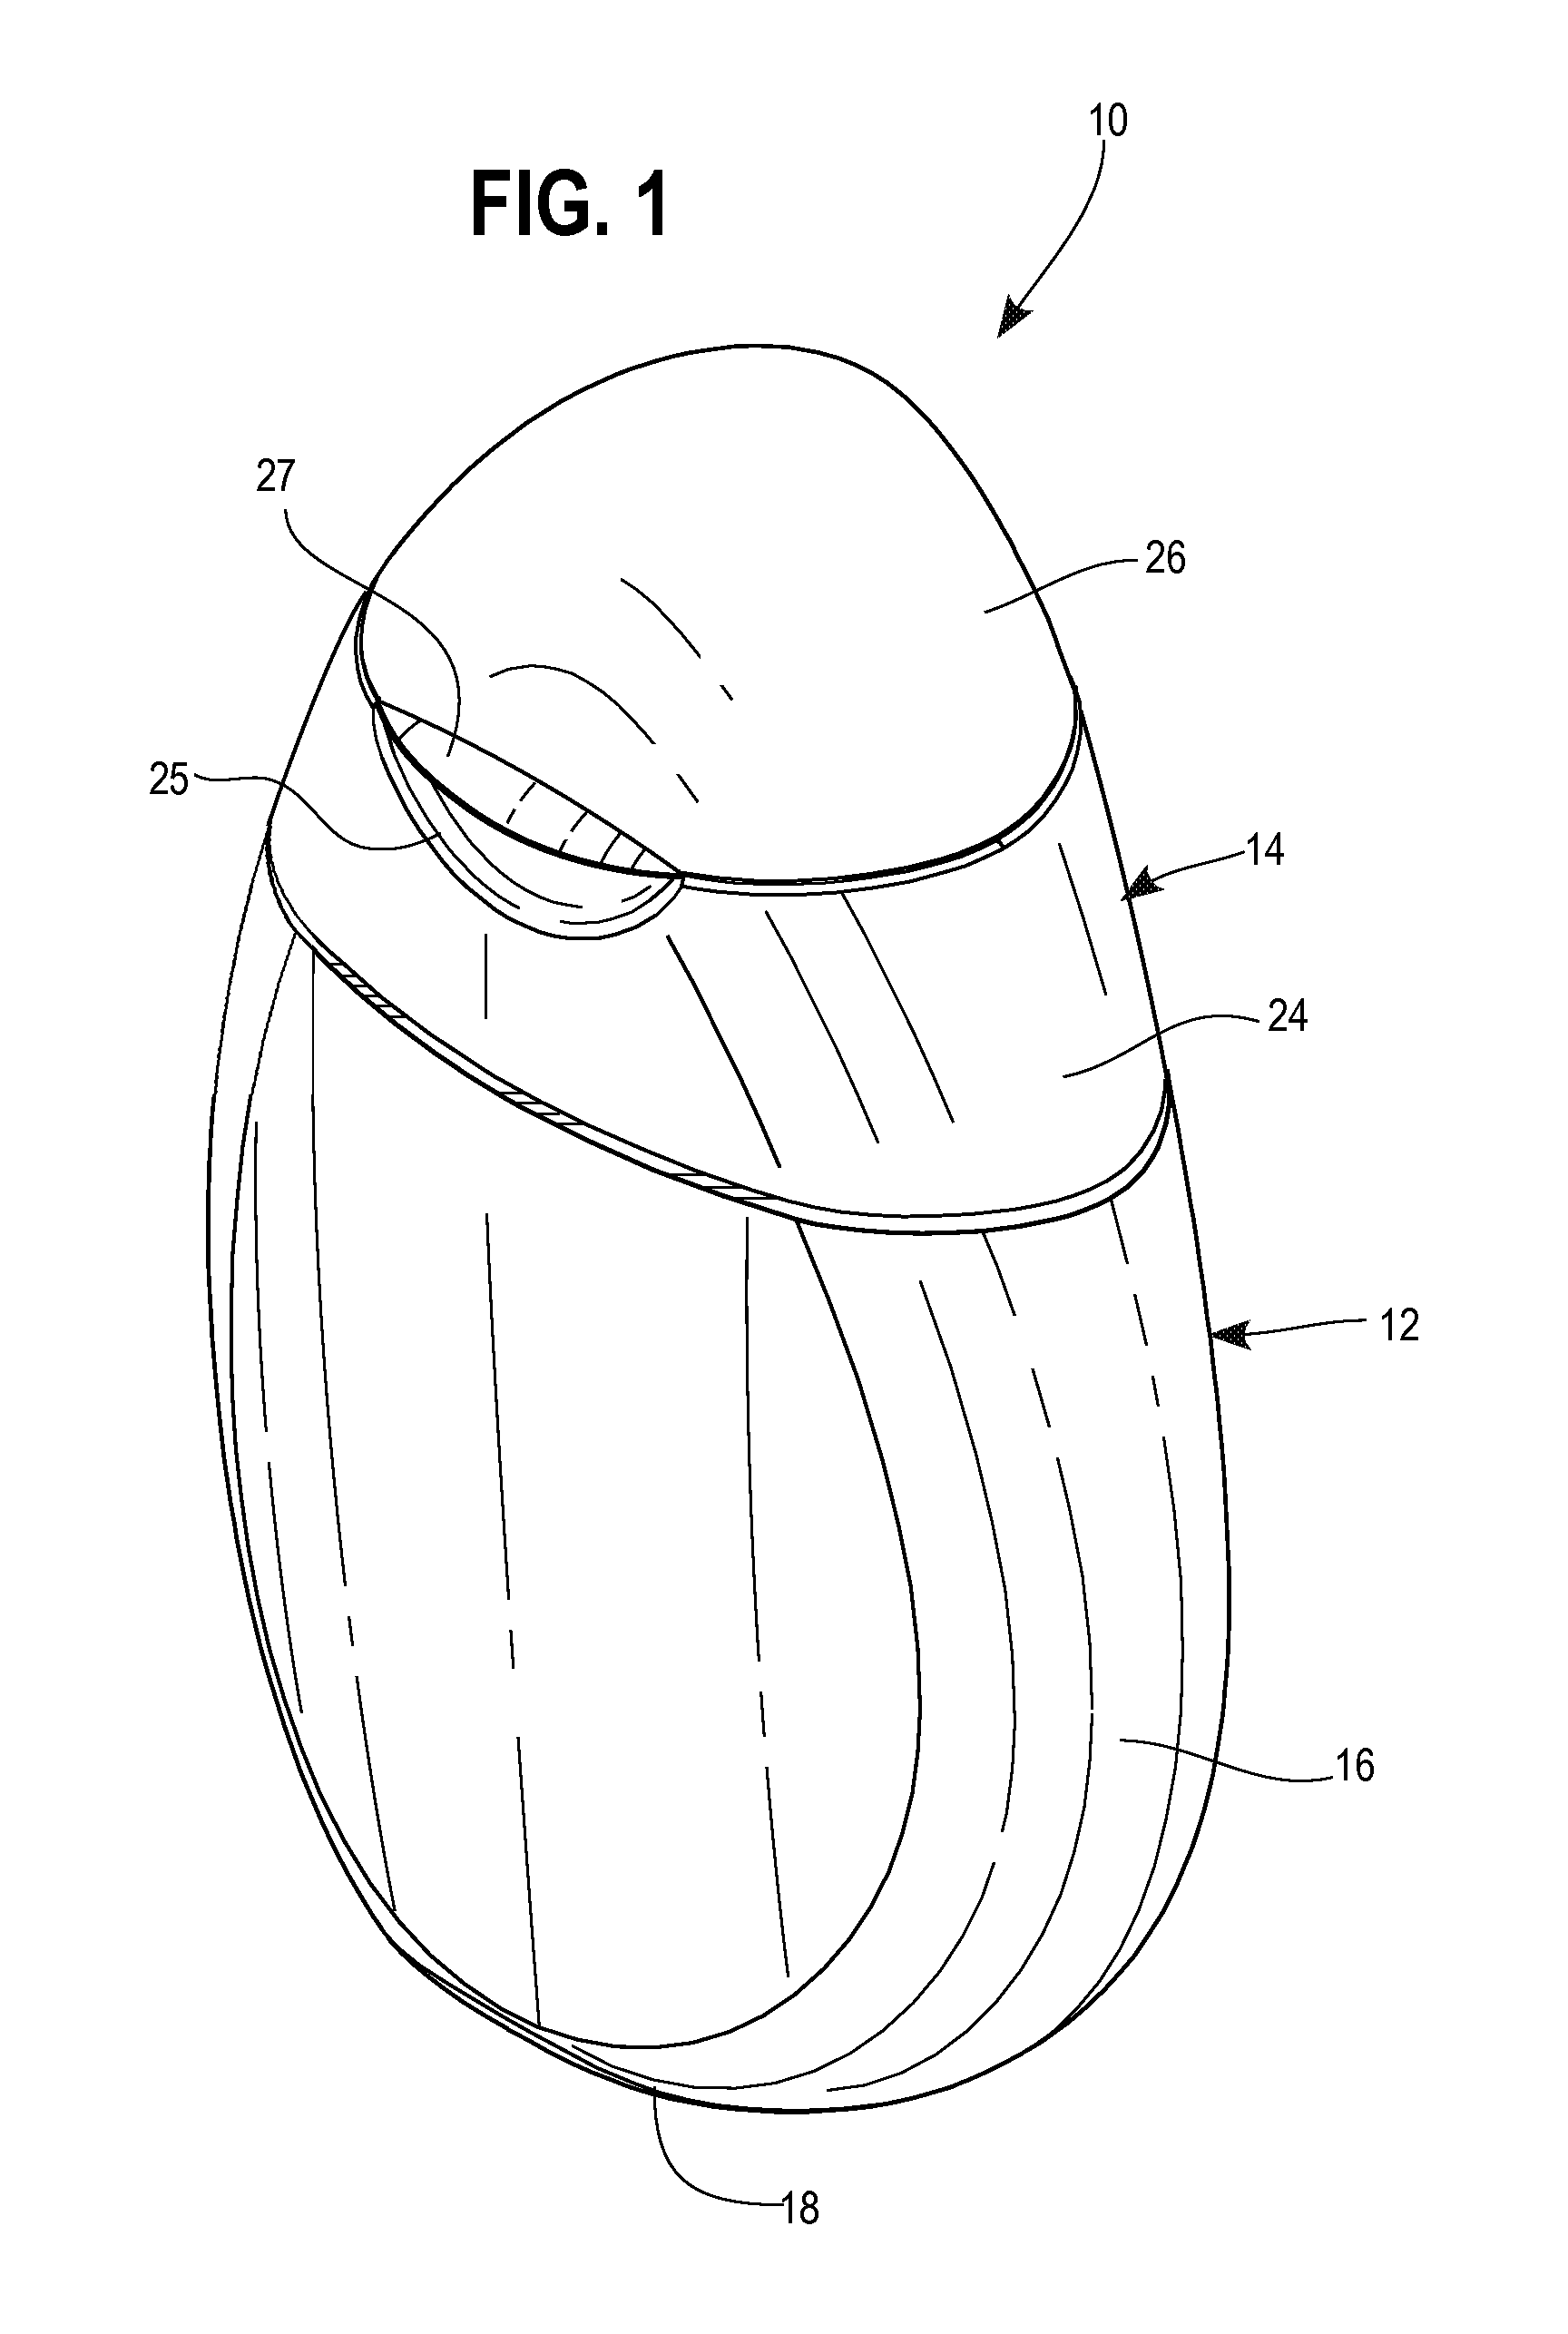 Containers and methods for isolating liquids prior to dispensing